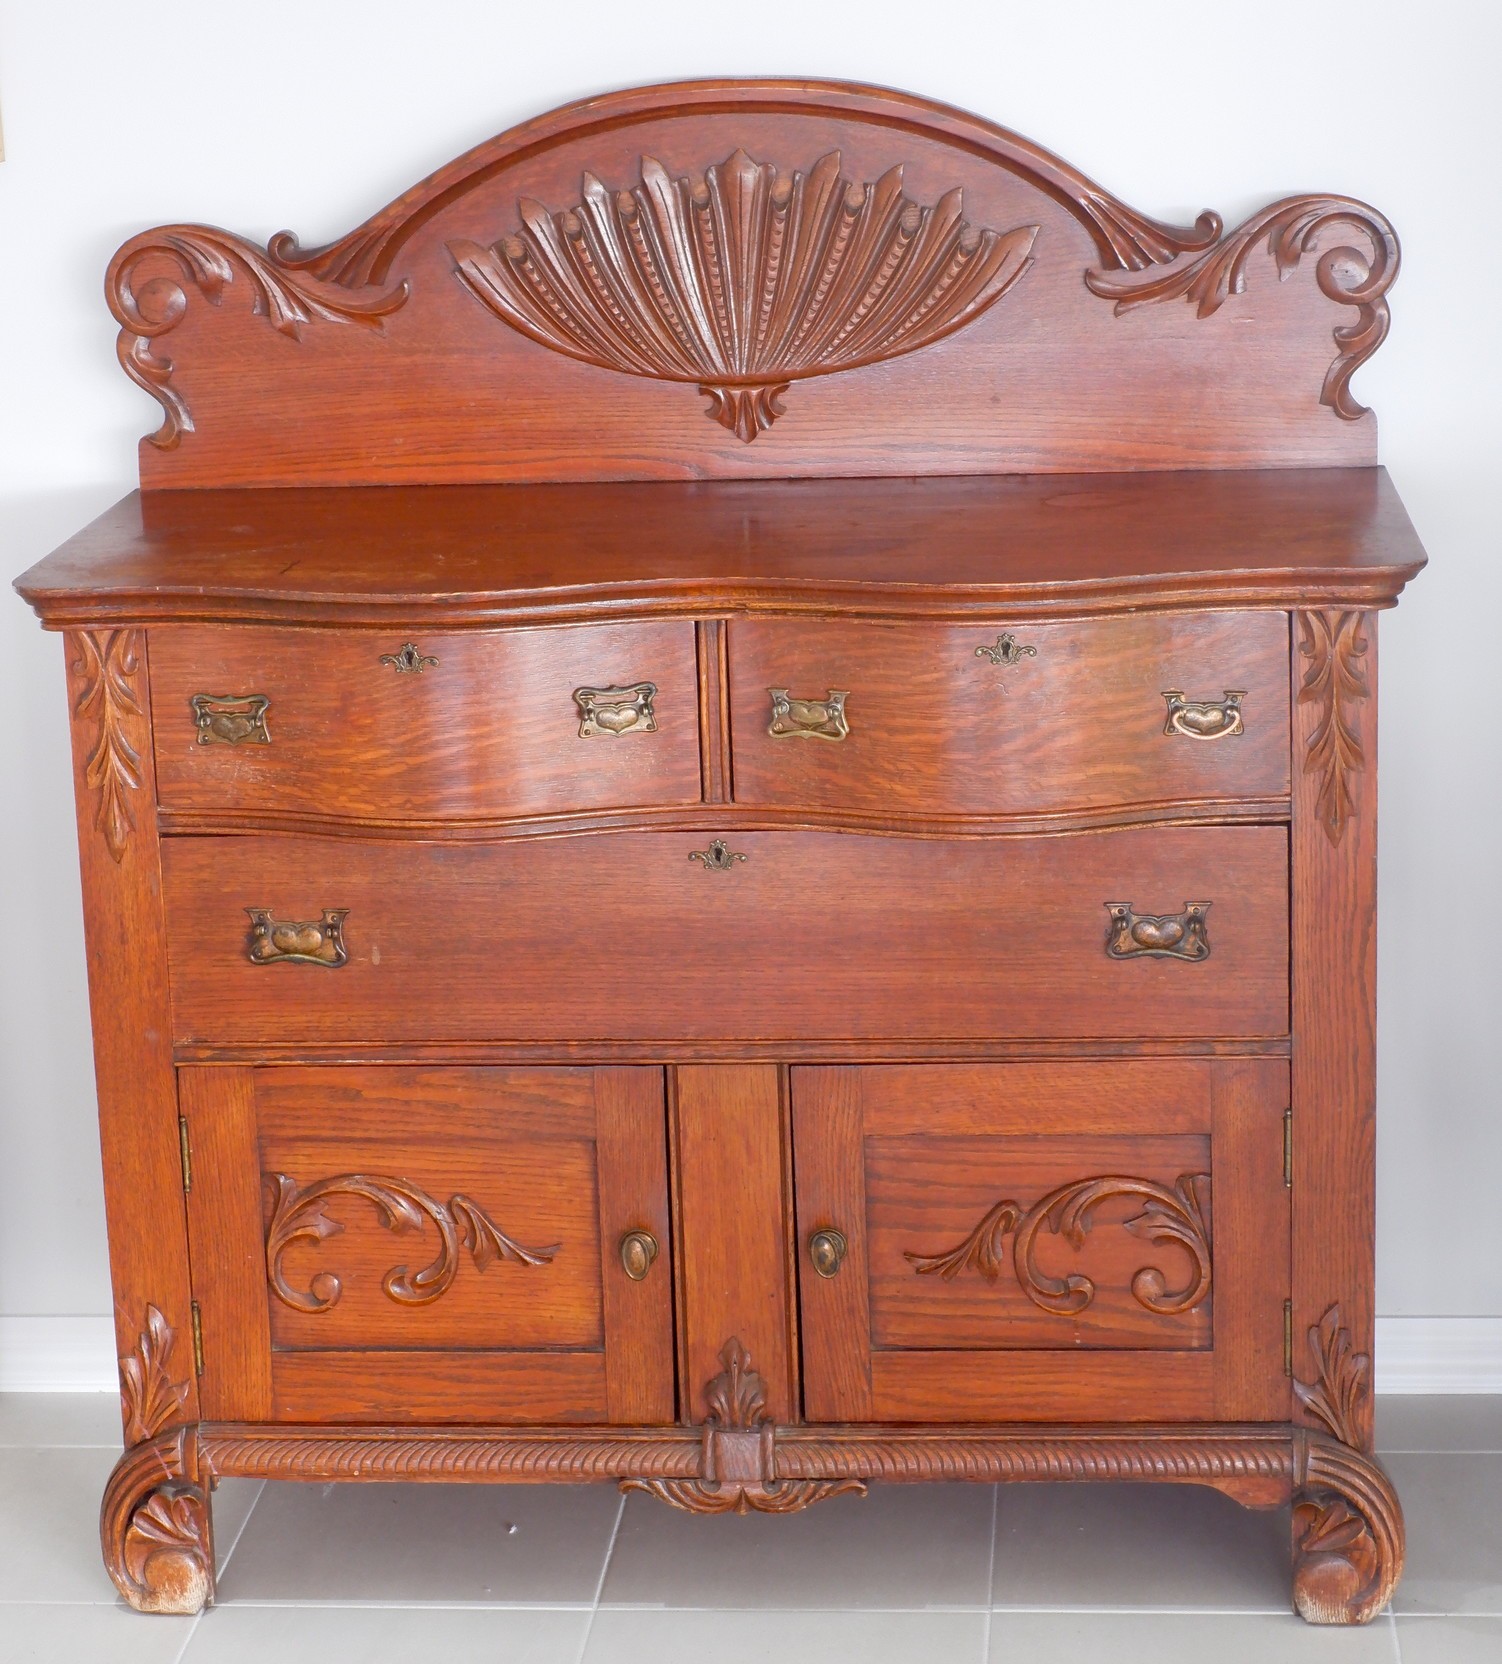 'American Oak Art Nouveau Style Sideboard of Small Proportions Early 20th Century'